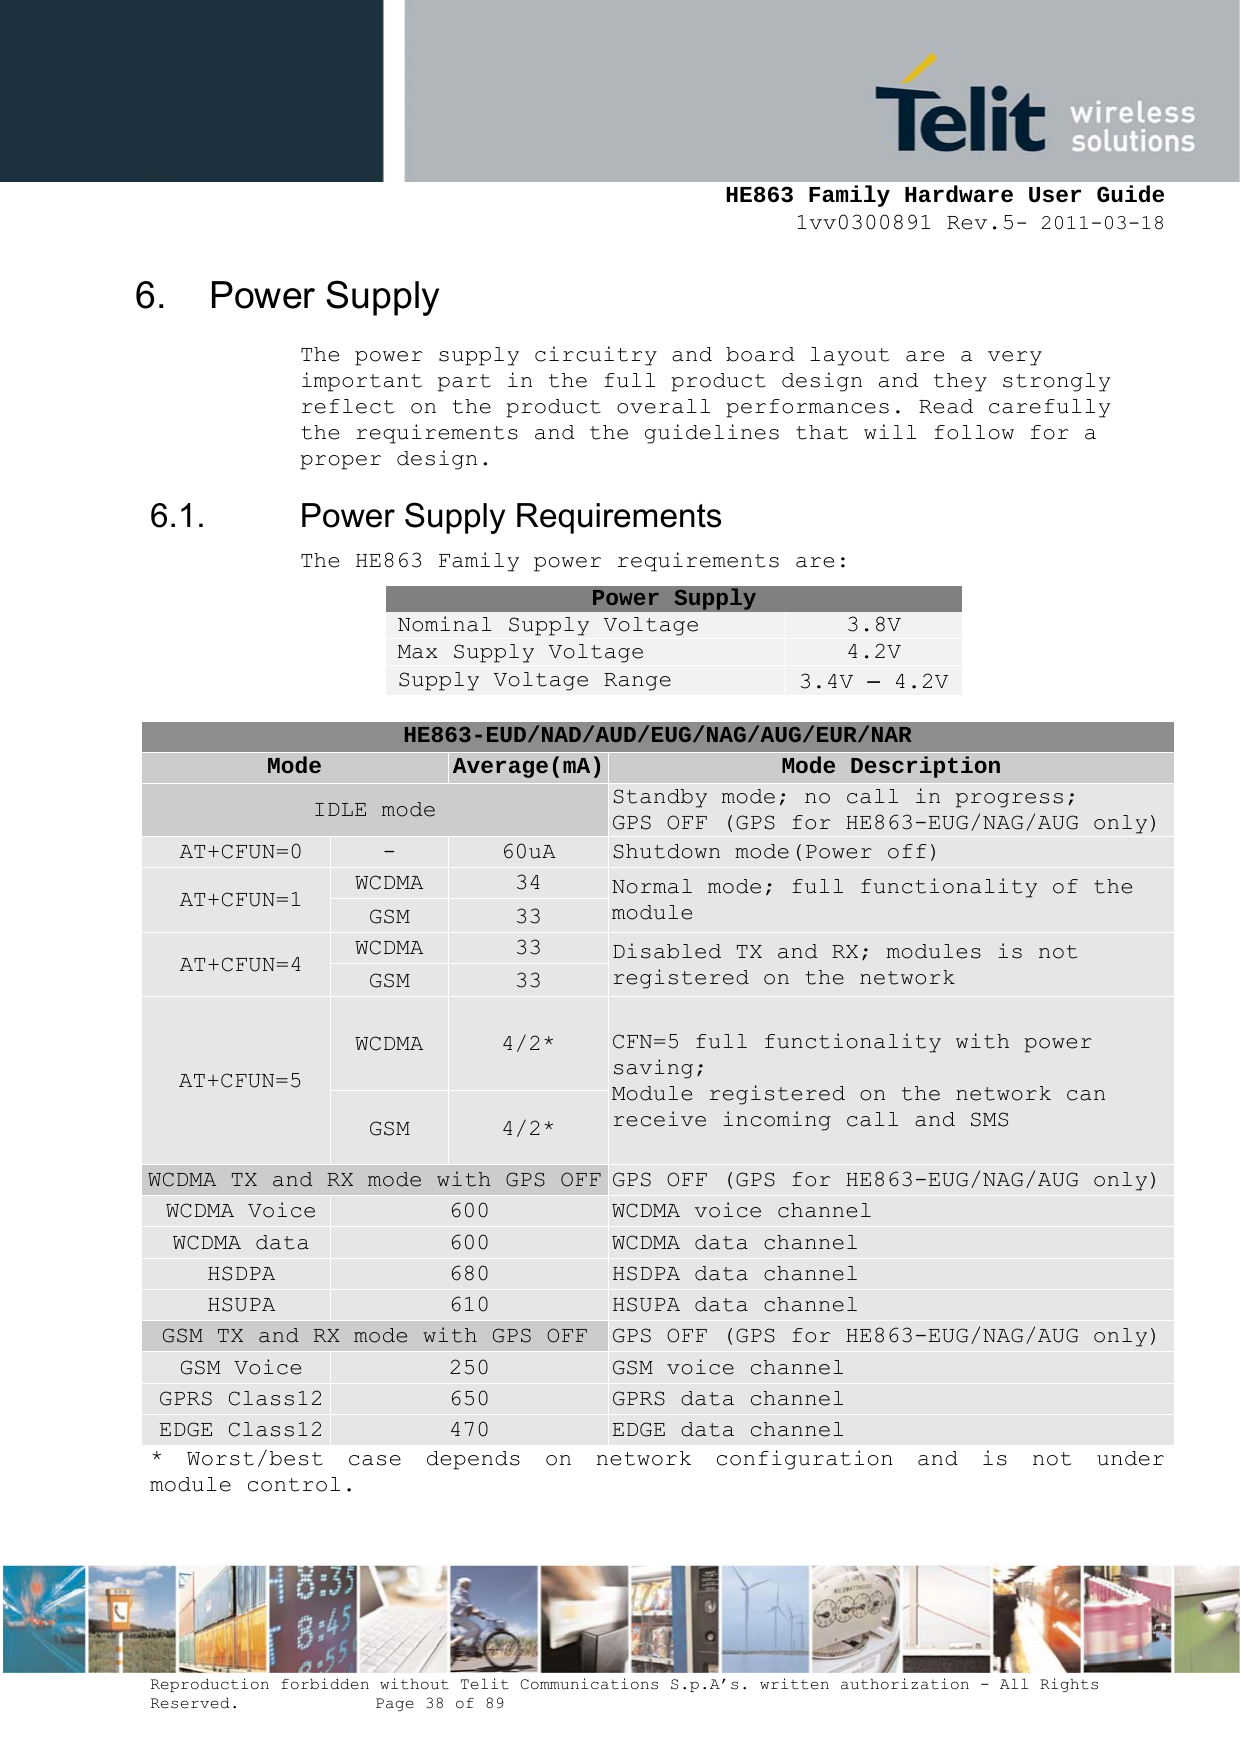     HE863 Family Hardware User Guide 1vv0300891 Rev.5- 2011-03-18    Reproduction forbidden without Telit Communications S.p.A’s. written authorization - All Rights Reserved.    Page 38 of 89  6. Power Supply The power supply circuitry and board layout are a very important part in the full product design and they strongly reflect on the product overall performances. Read carefully the requirements and the guidelines that will follow for a proper design. 6.1.  Power Supply Requirements The HE863 Family power requirements are: Power Supply Nominal Supply Voltage  3.8V Max Supply Voltage  4.2V Supply Voltage Range  3.4V – 4.2V  HE863-EUD/NAD/AUD/EUG/NAG/AUG/EUR/NAR Mode  Average(mA) Mode Description IDLE mode  Standby mode; no call in progress;  GPS OFF (GPS for HE863-EUG/NAG/AUG only)AT+CFUN=0  -  60uA  Shutdown mode(Power off) AT+CFUN=1  WCDMA  34  Normal mode; full functionality of the module GSM  33 AT+CFUN=4  WCDMA  33  Disabled TX and RX; modules is not registered on the network GSM  33 AT+CFUN=5 WCDMA  4/2*  CFN=5 full functionality with power saving; Module registered on the network can receive incoming call and SMS GSM  4/2* WCDMA TX and RX mode with GPS OFF GPS OFF (GPS for HE863-EUG/NAG/AUG only)WCDMA Voice  600  WCDMA voice channel WCDMA data  600  WCDMA data channel HSDPA  680  HSDPA data channel HSUPA  610  HSUPA data channel GSM TX and RX mode with GPS OFF  GPS OFF (GPS for HE863-EUG/NAG/AUG only)GSM Voice  250  GSM voice channel GPRS Class12  650  GPRS data channel EDGE Class12  470  EDGE data channel * Worst/best case depends on network configuration and is not under module control.  